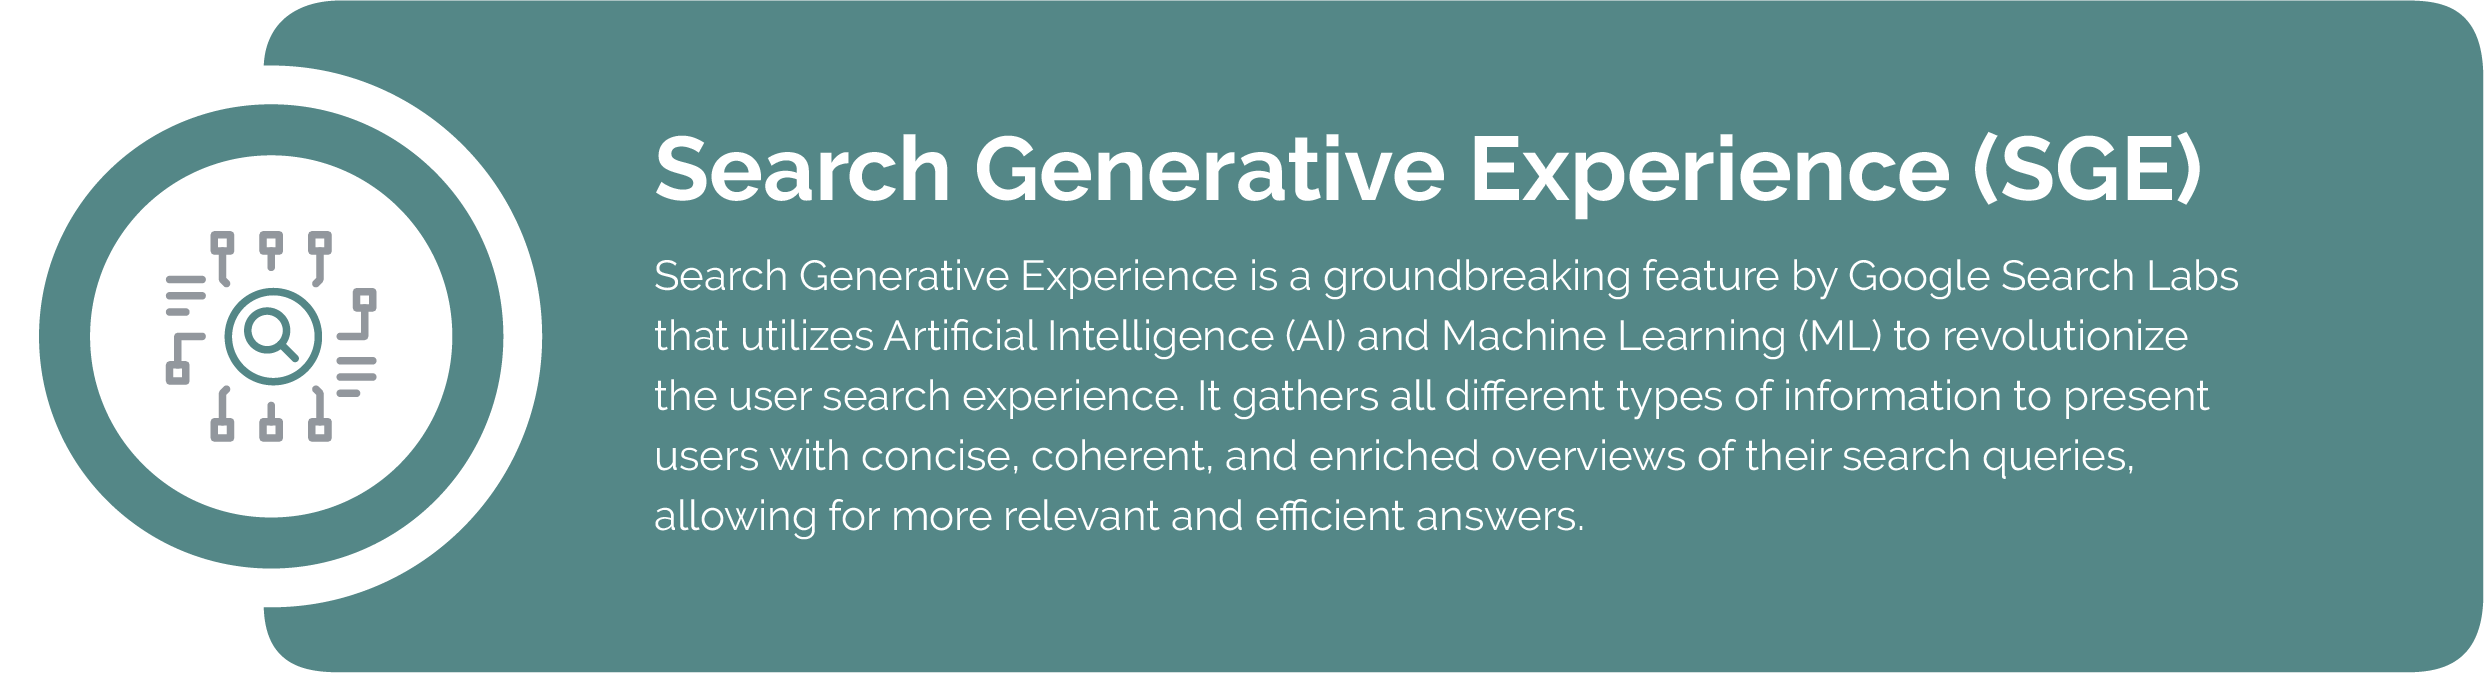 Search Generative Experience SGE